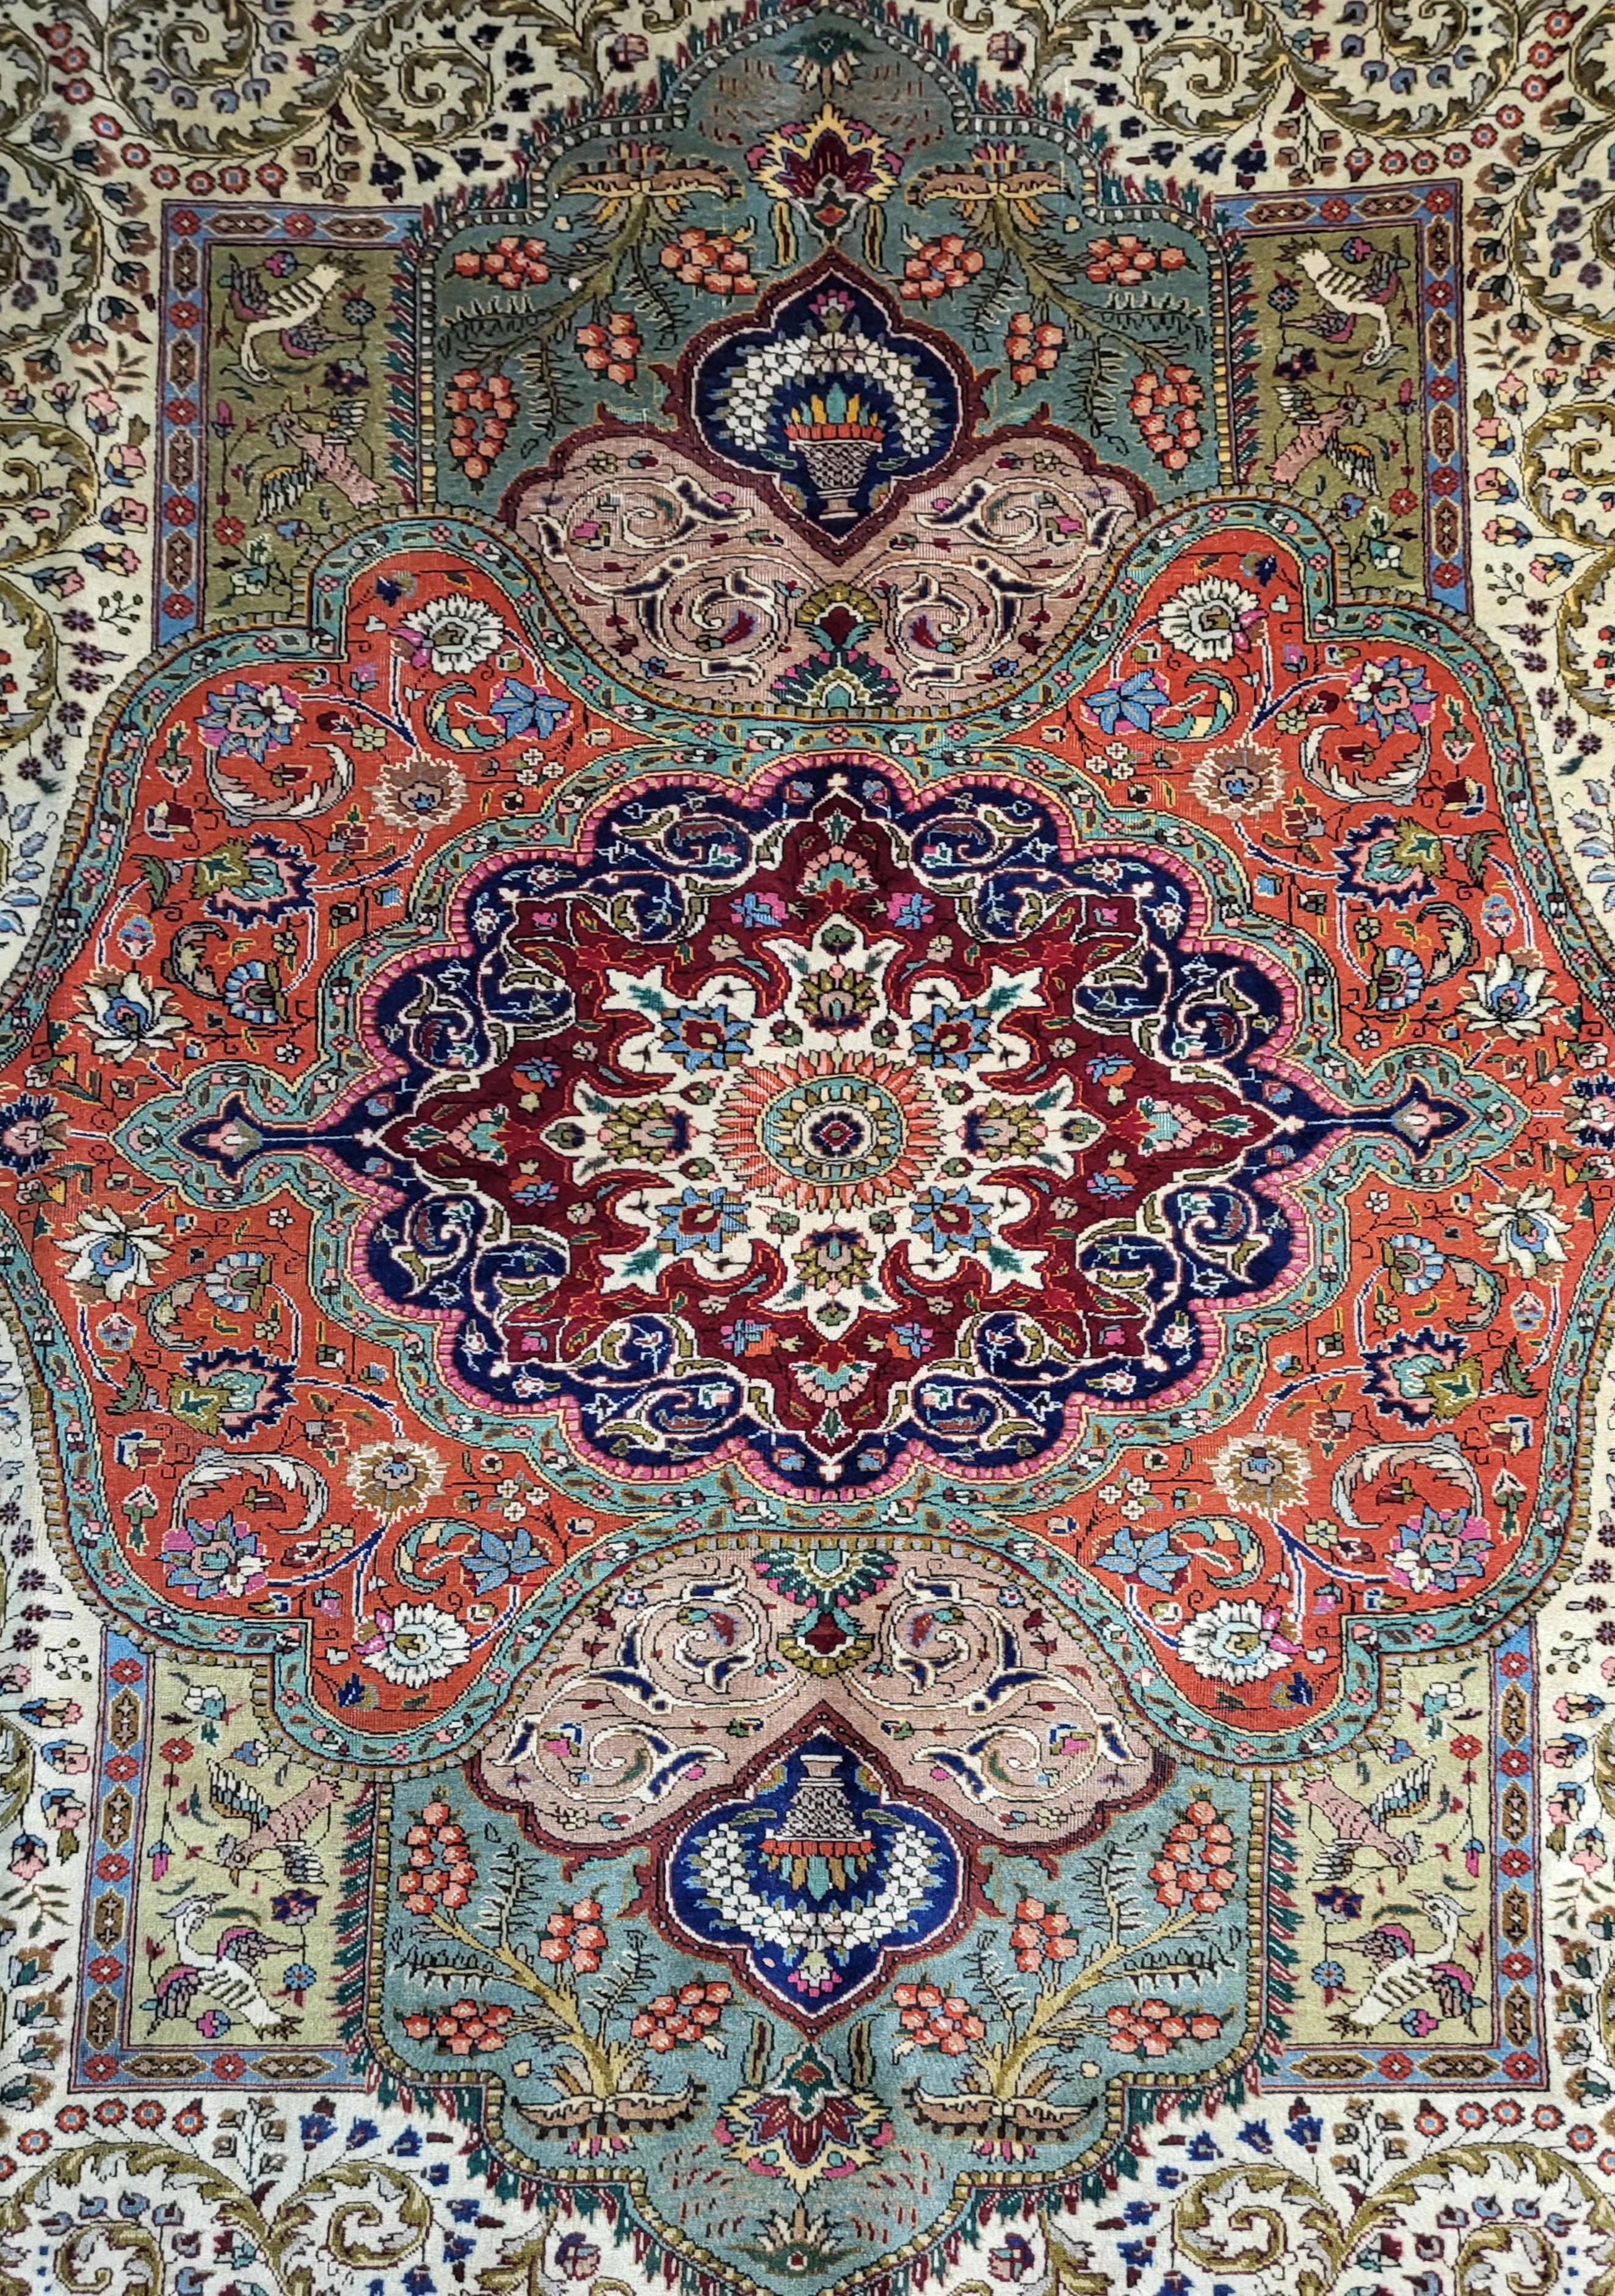 Exquisite 50's Persian Tabriz

10' x 13' 

Incredibly unique hand crafted master piece from the legendary city of Tabriz. Rugs from this area can range in design, but always feature a high level of quality in both design and materials. This piece is